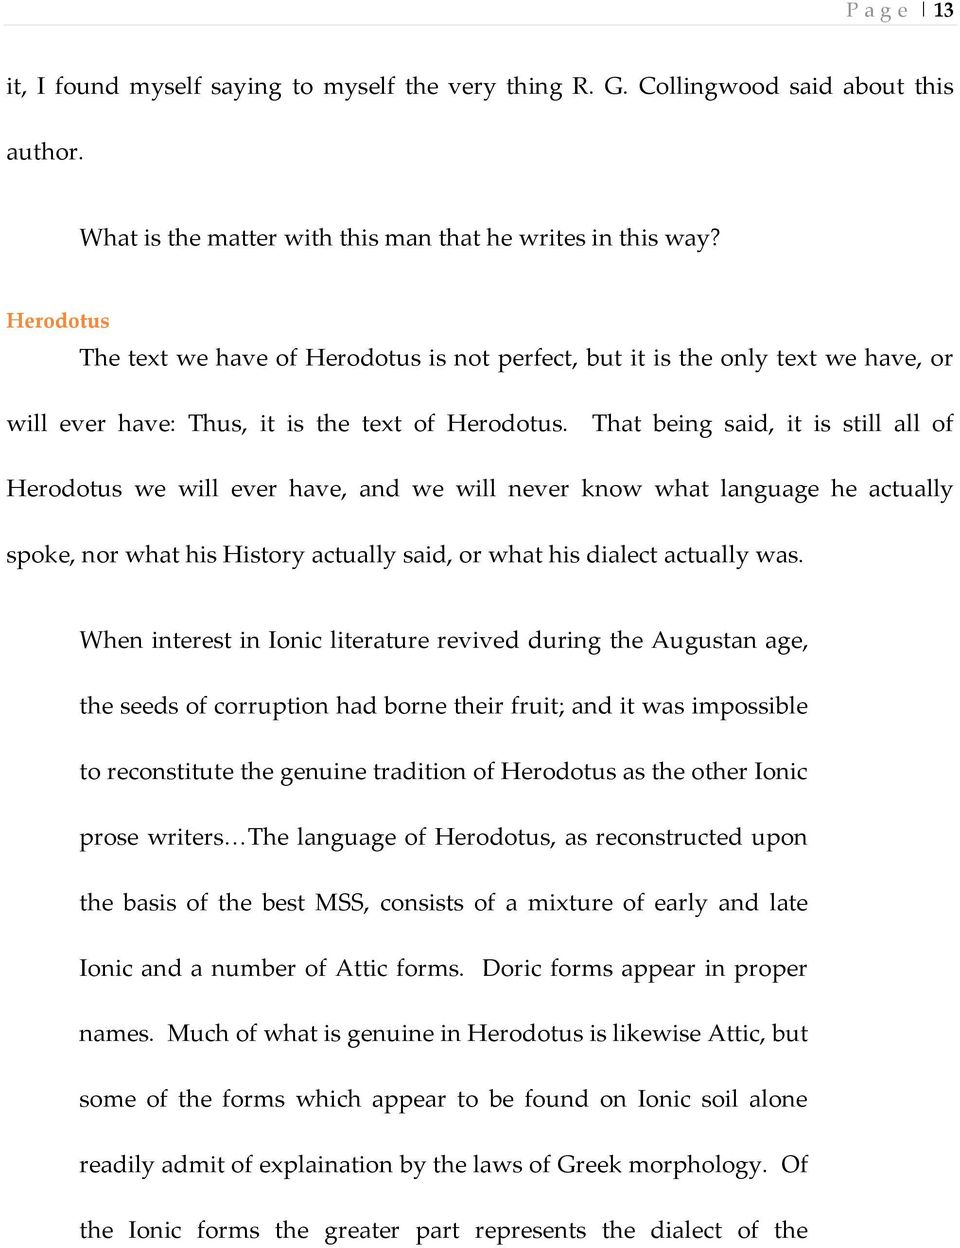 That being said, it is still all of Herodotus we will ever have, and we will never know what language he actually spoke, nor what his History actually said, or what his dialect actually was.